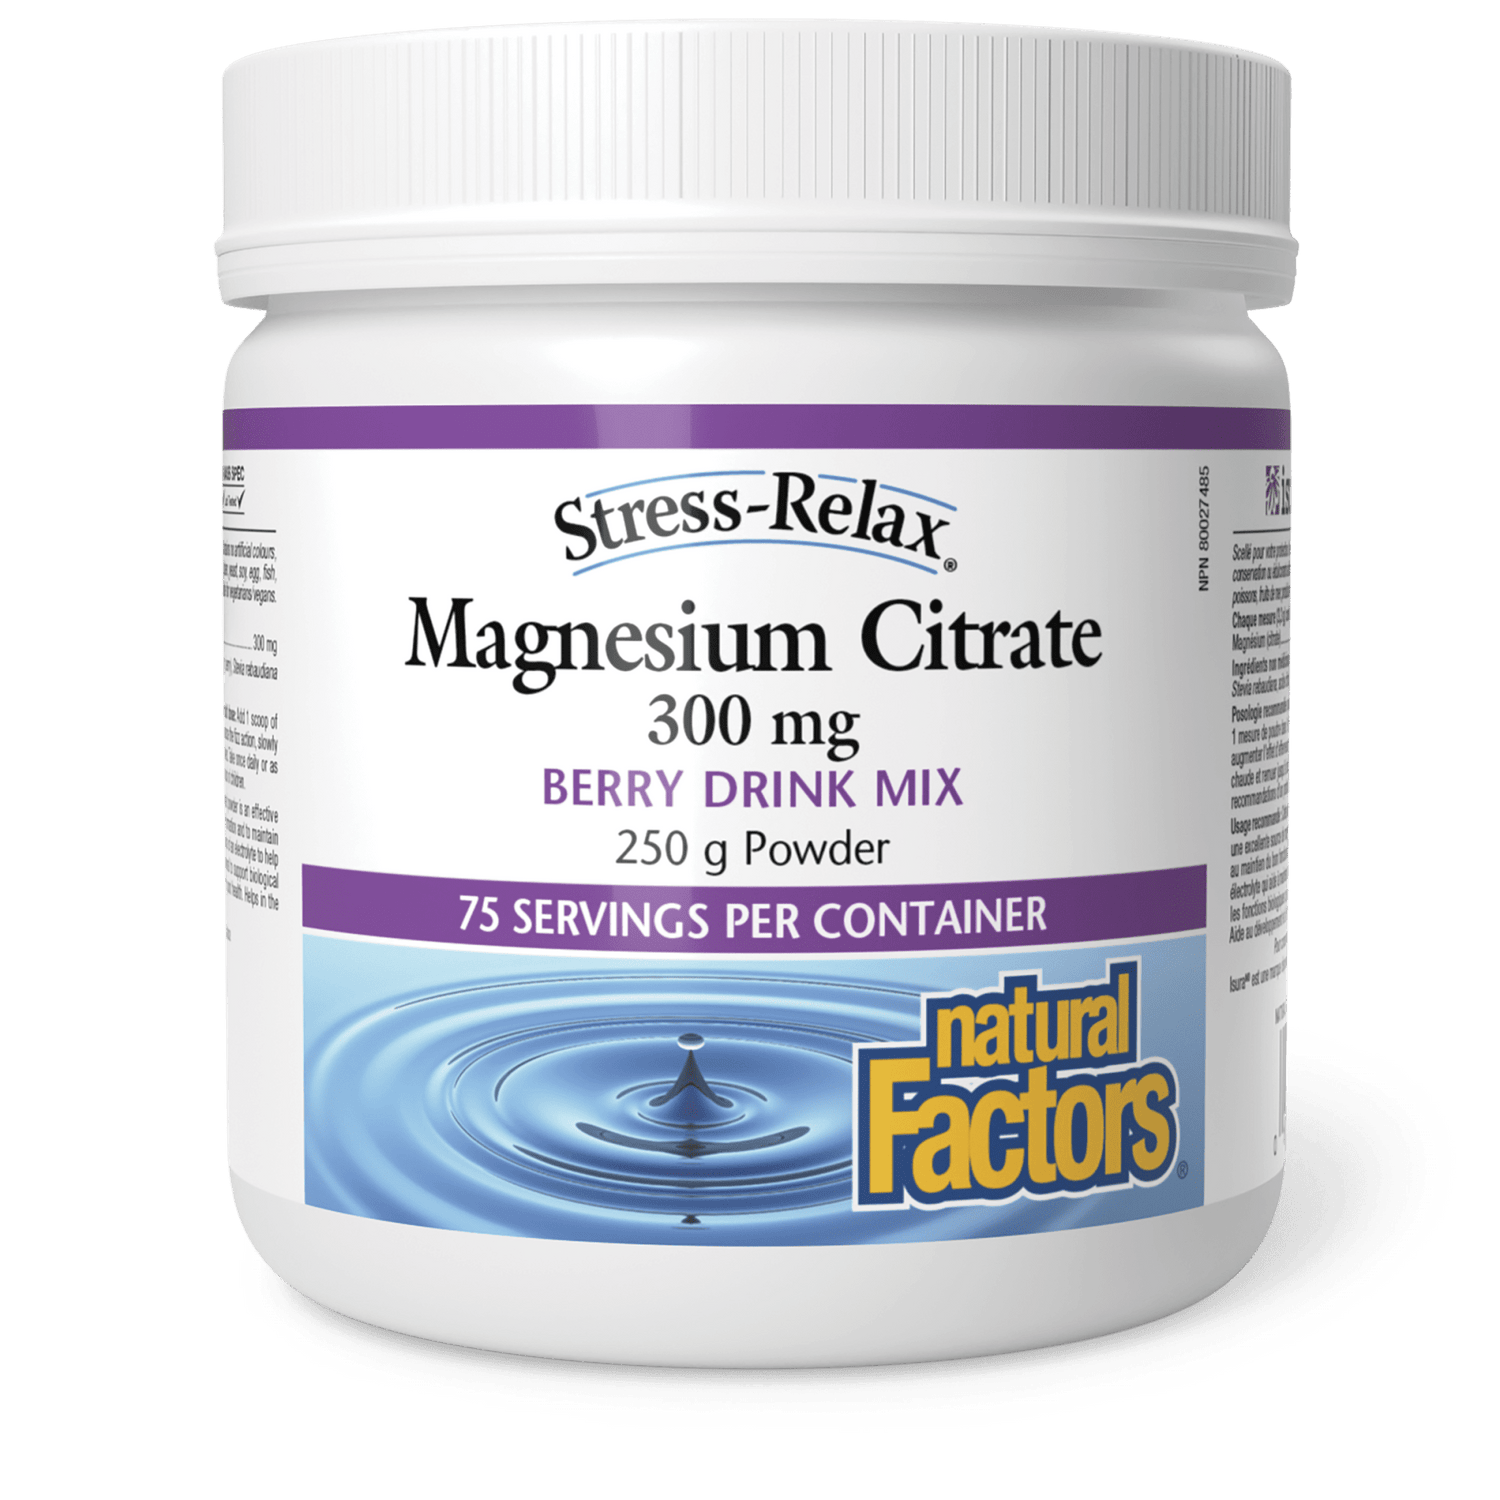 Magnesium Citrate 300 mg, Berry, Stress-Relax, Natural Factors|v|image|3540